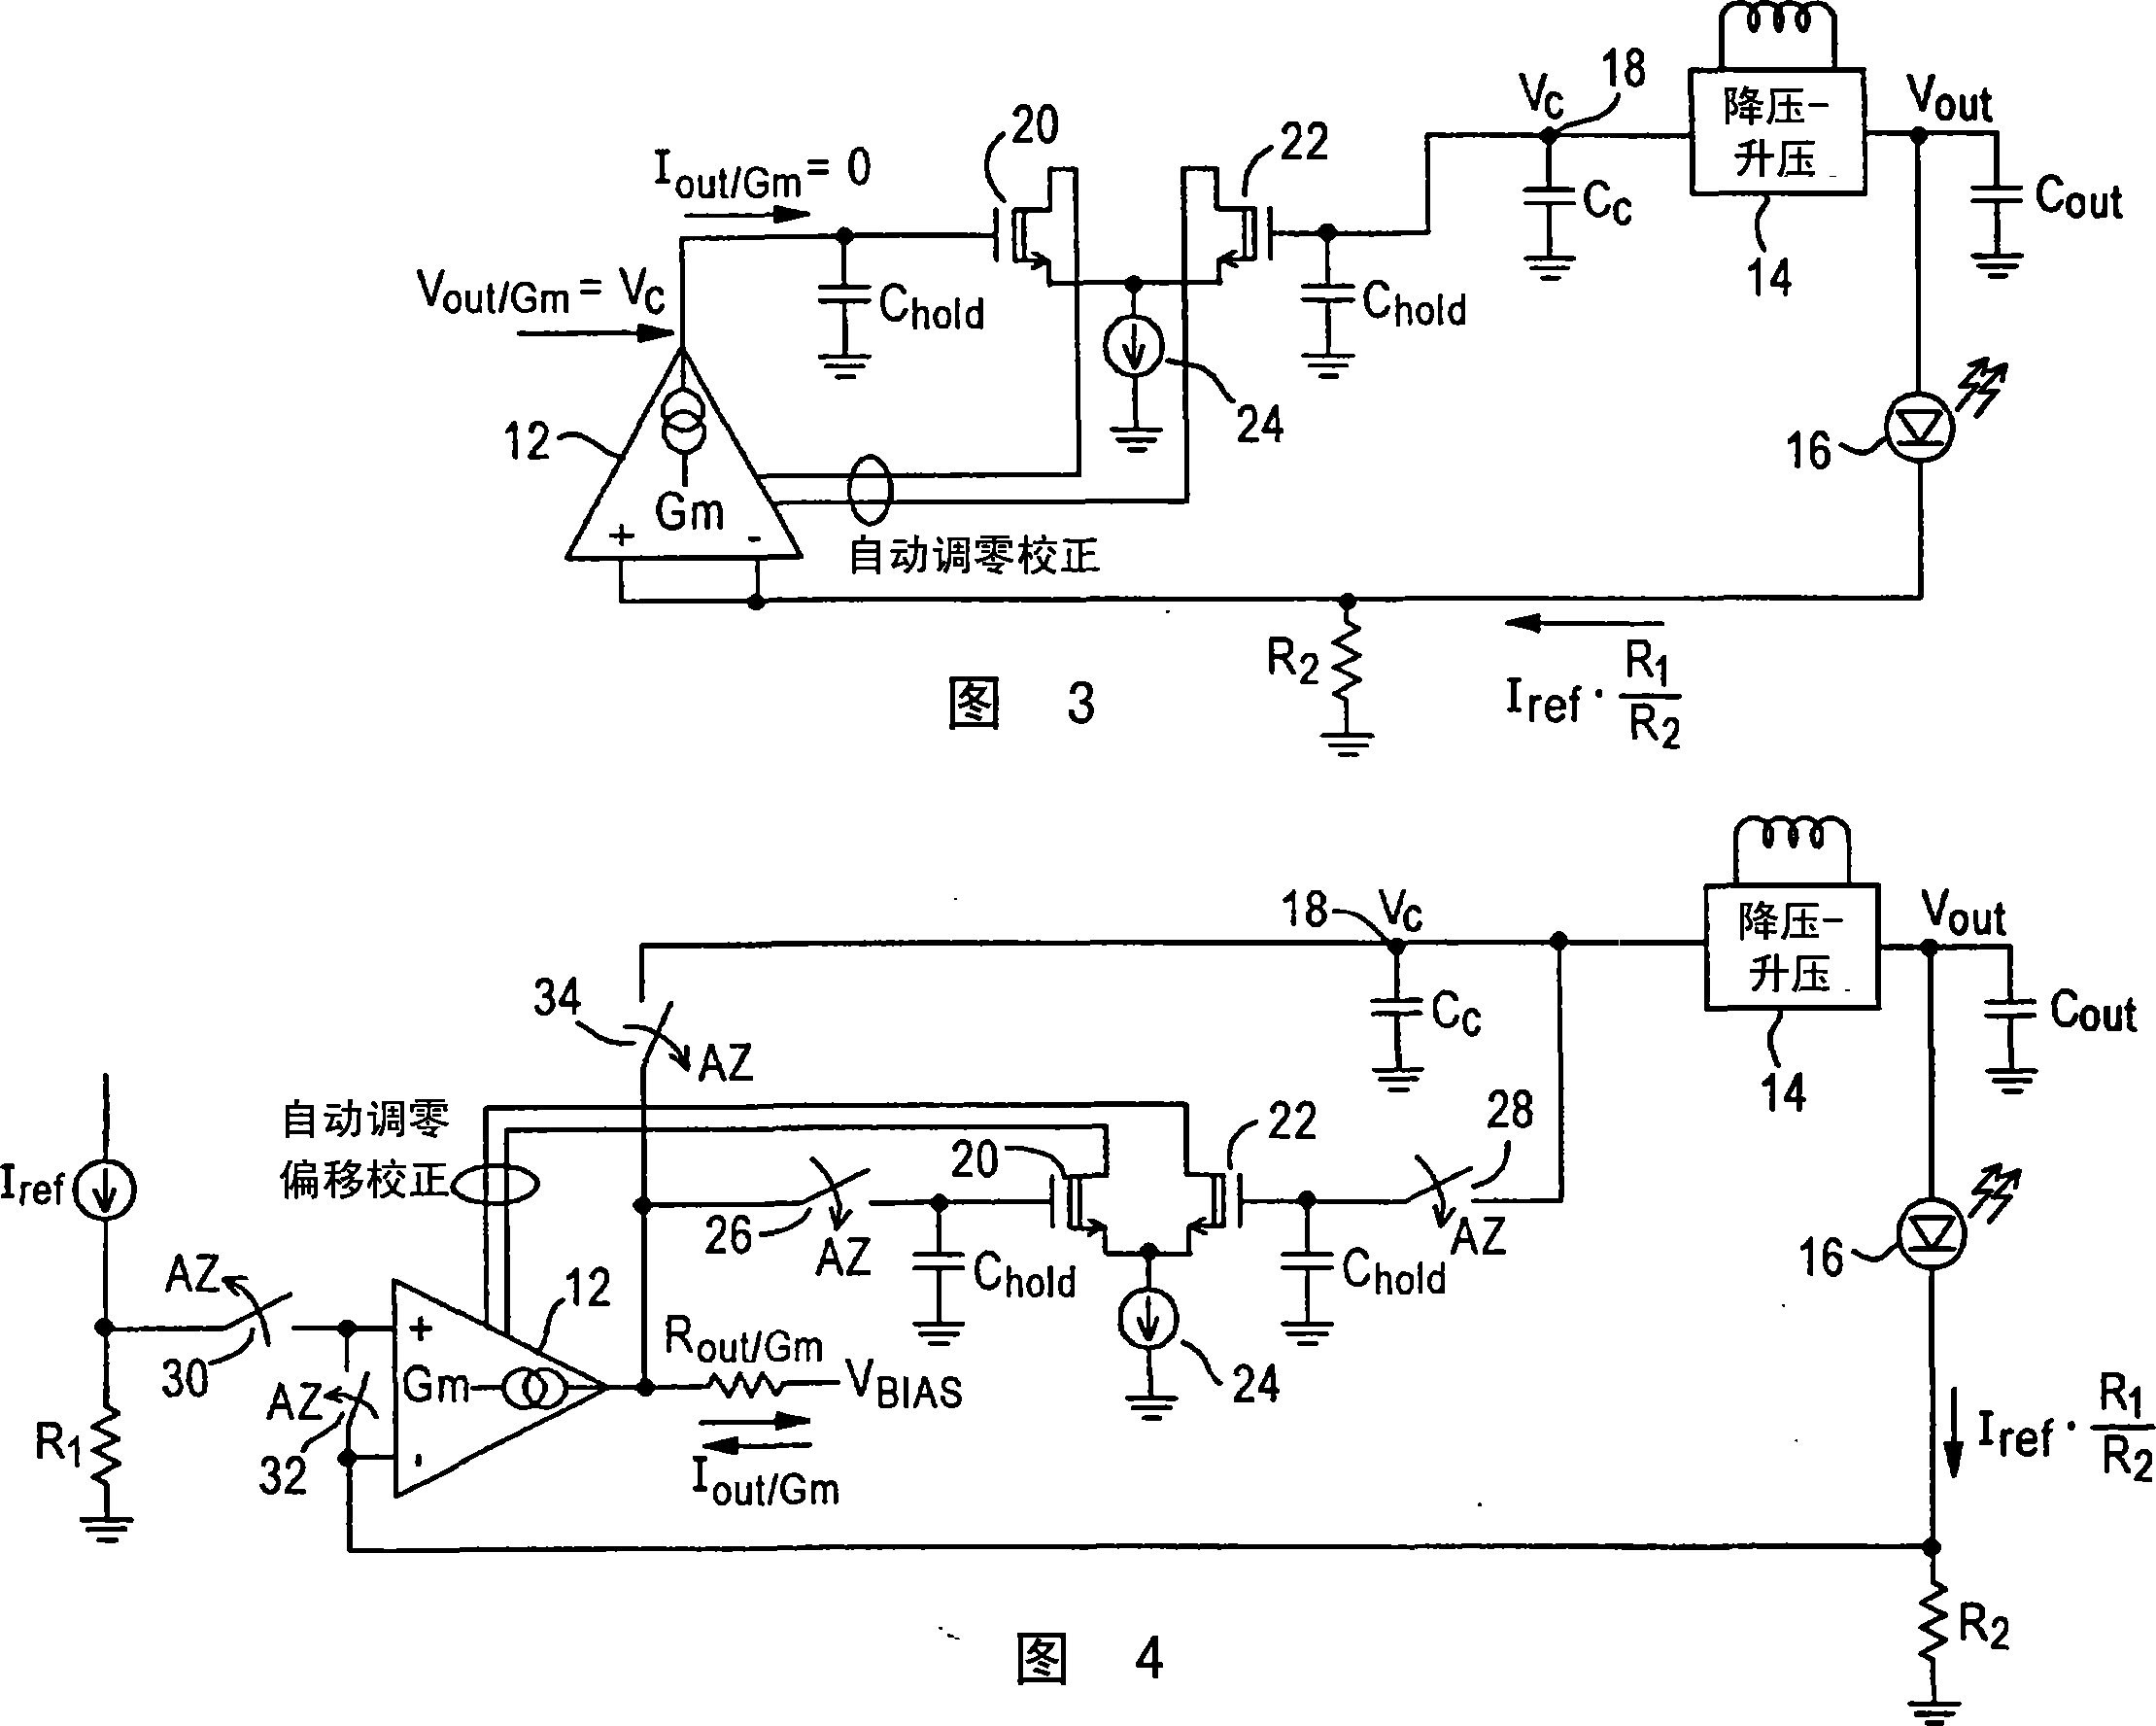 Offset correction circuit for voltage-controlled current source